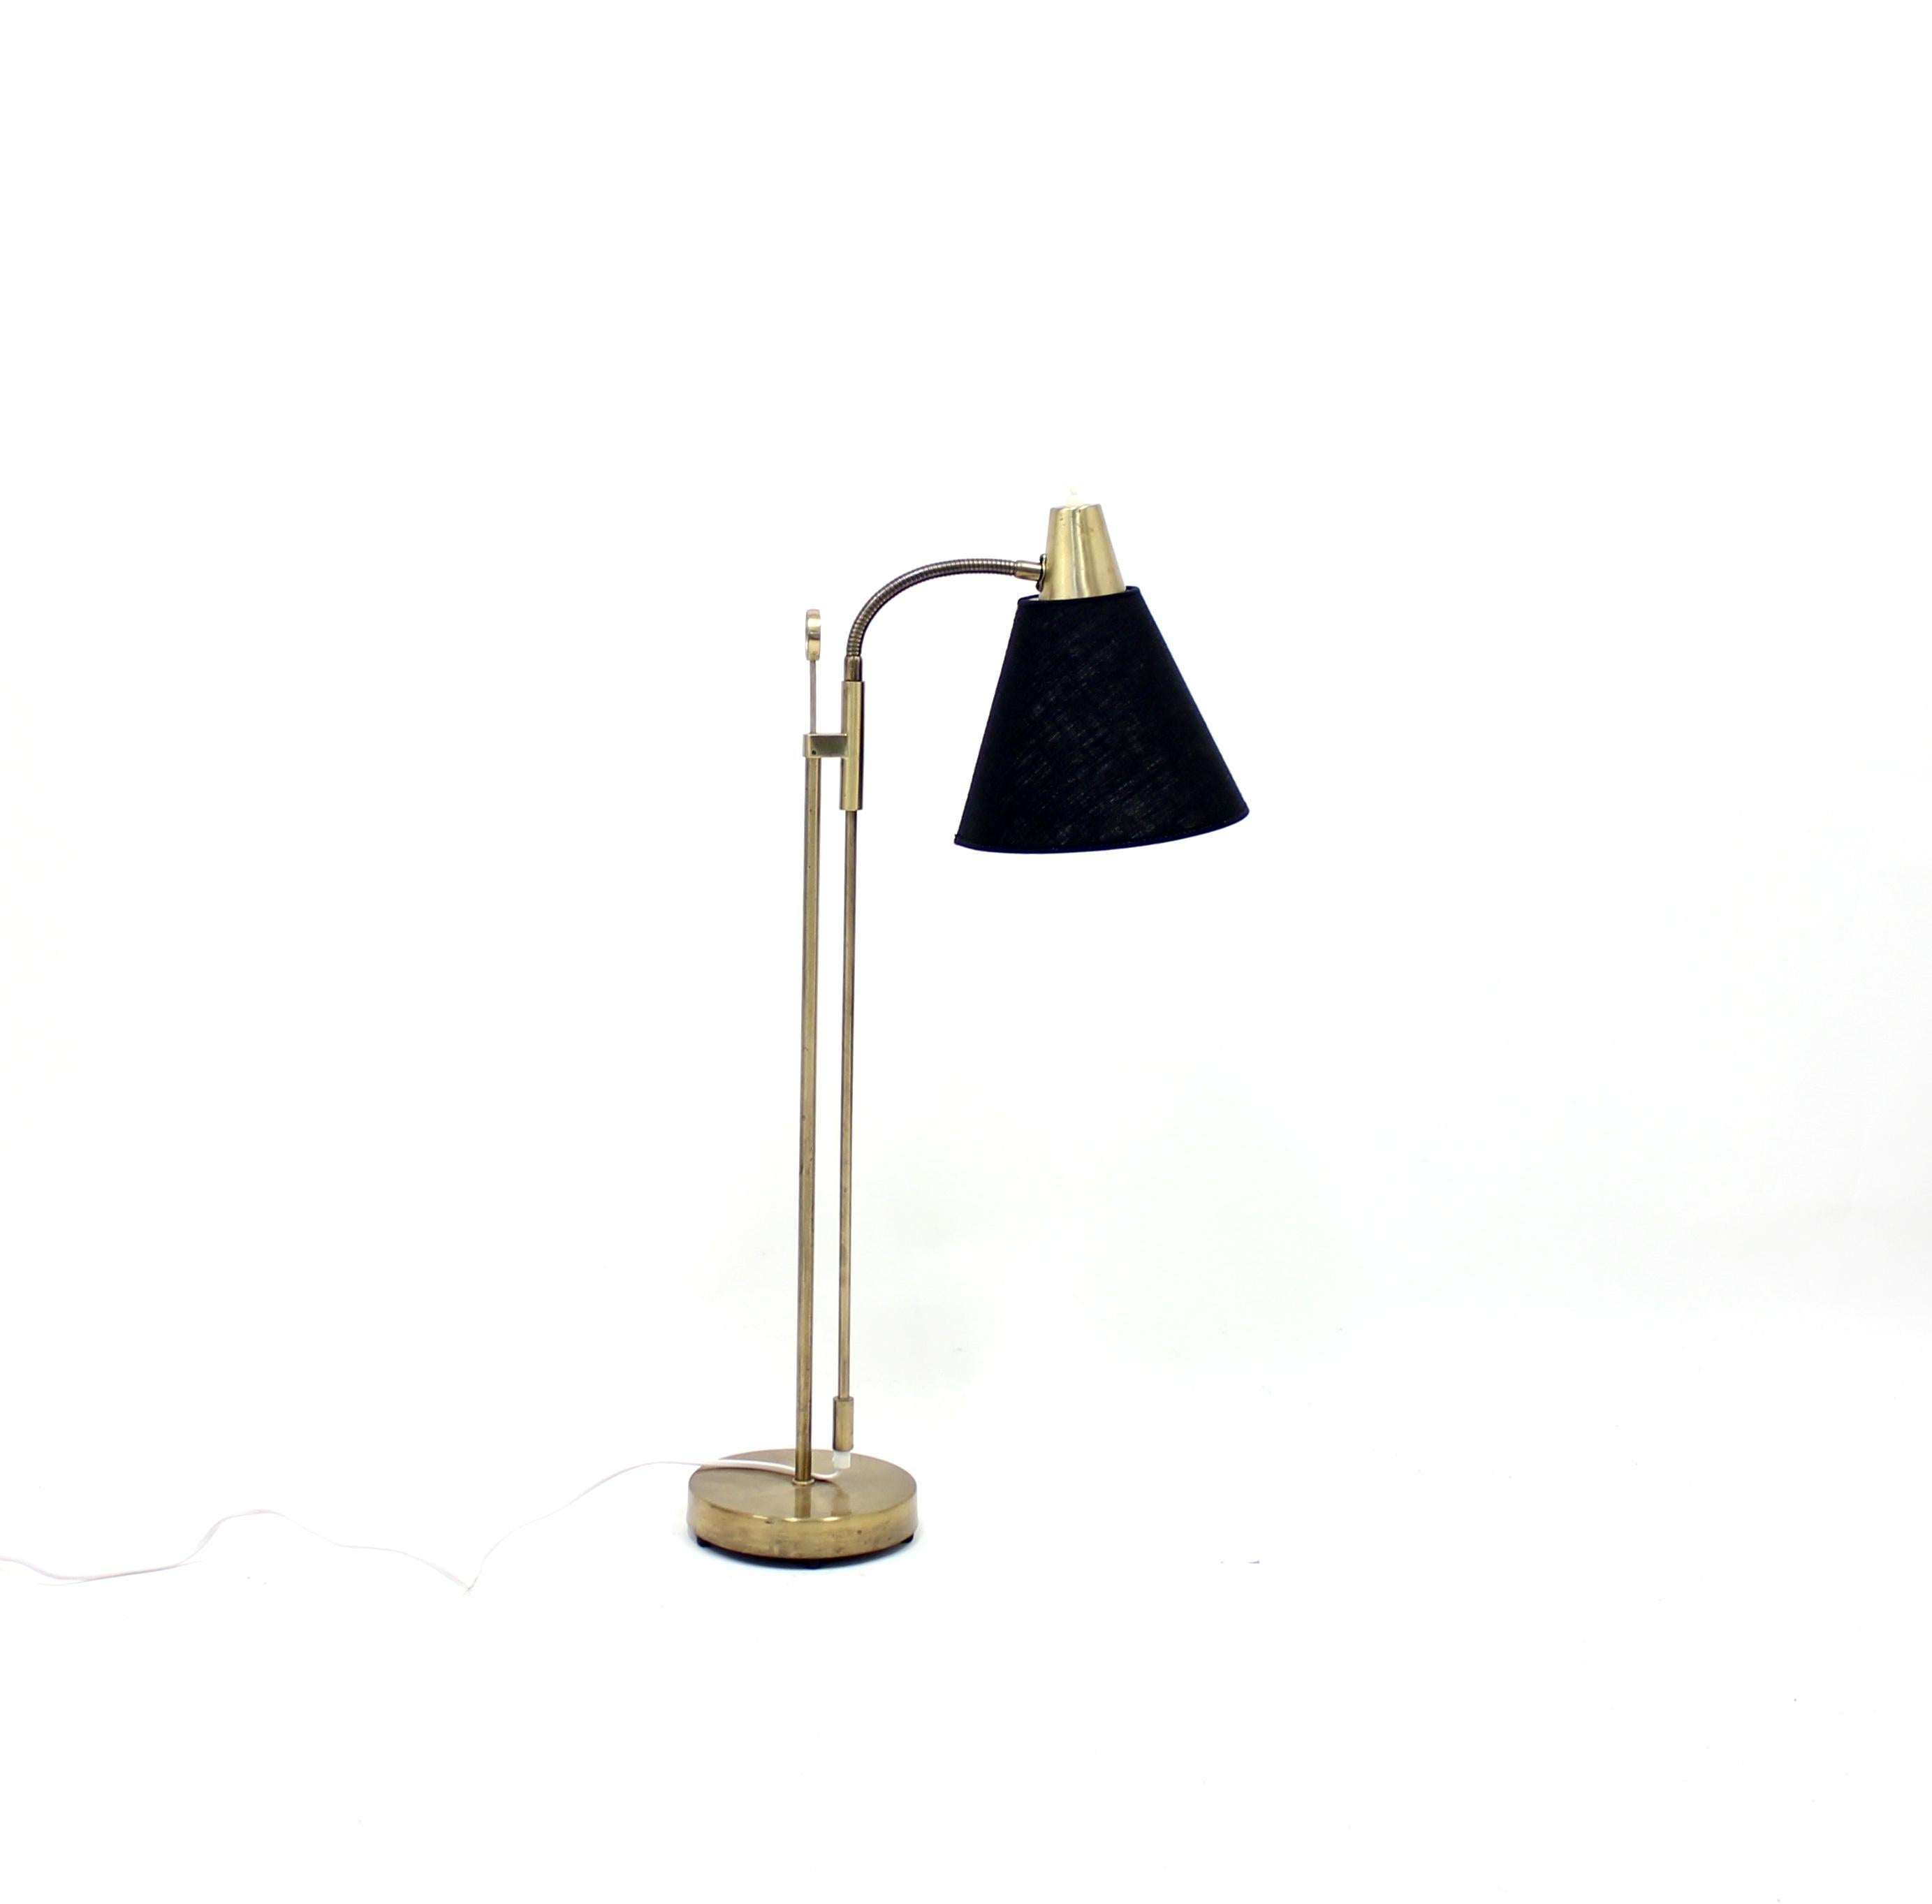 Midcentury floor lamp from Swedish manufacturer Falkenbergs Belysning. Height adjustable between 84 - 132 cm. Brass base and stem with new black fabric shade and new plug. Marked with makers mark under the base. Good vintage condition with ware